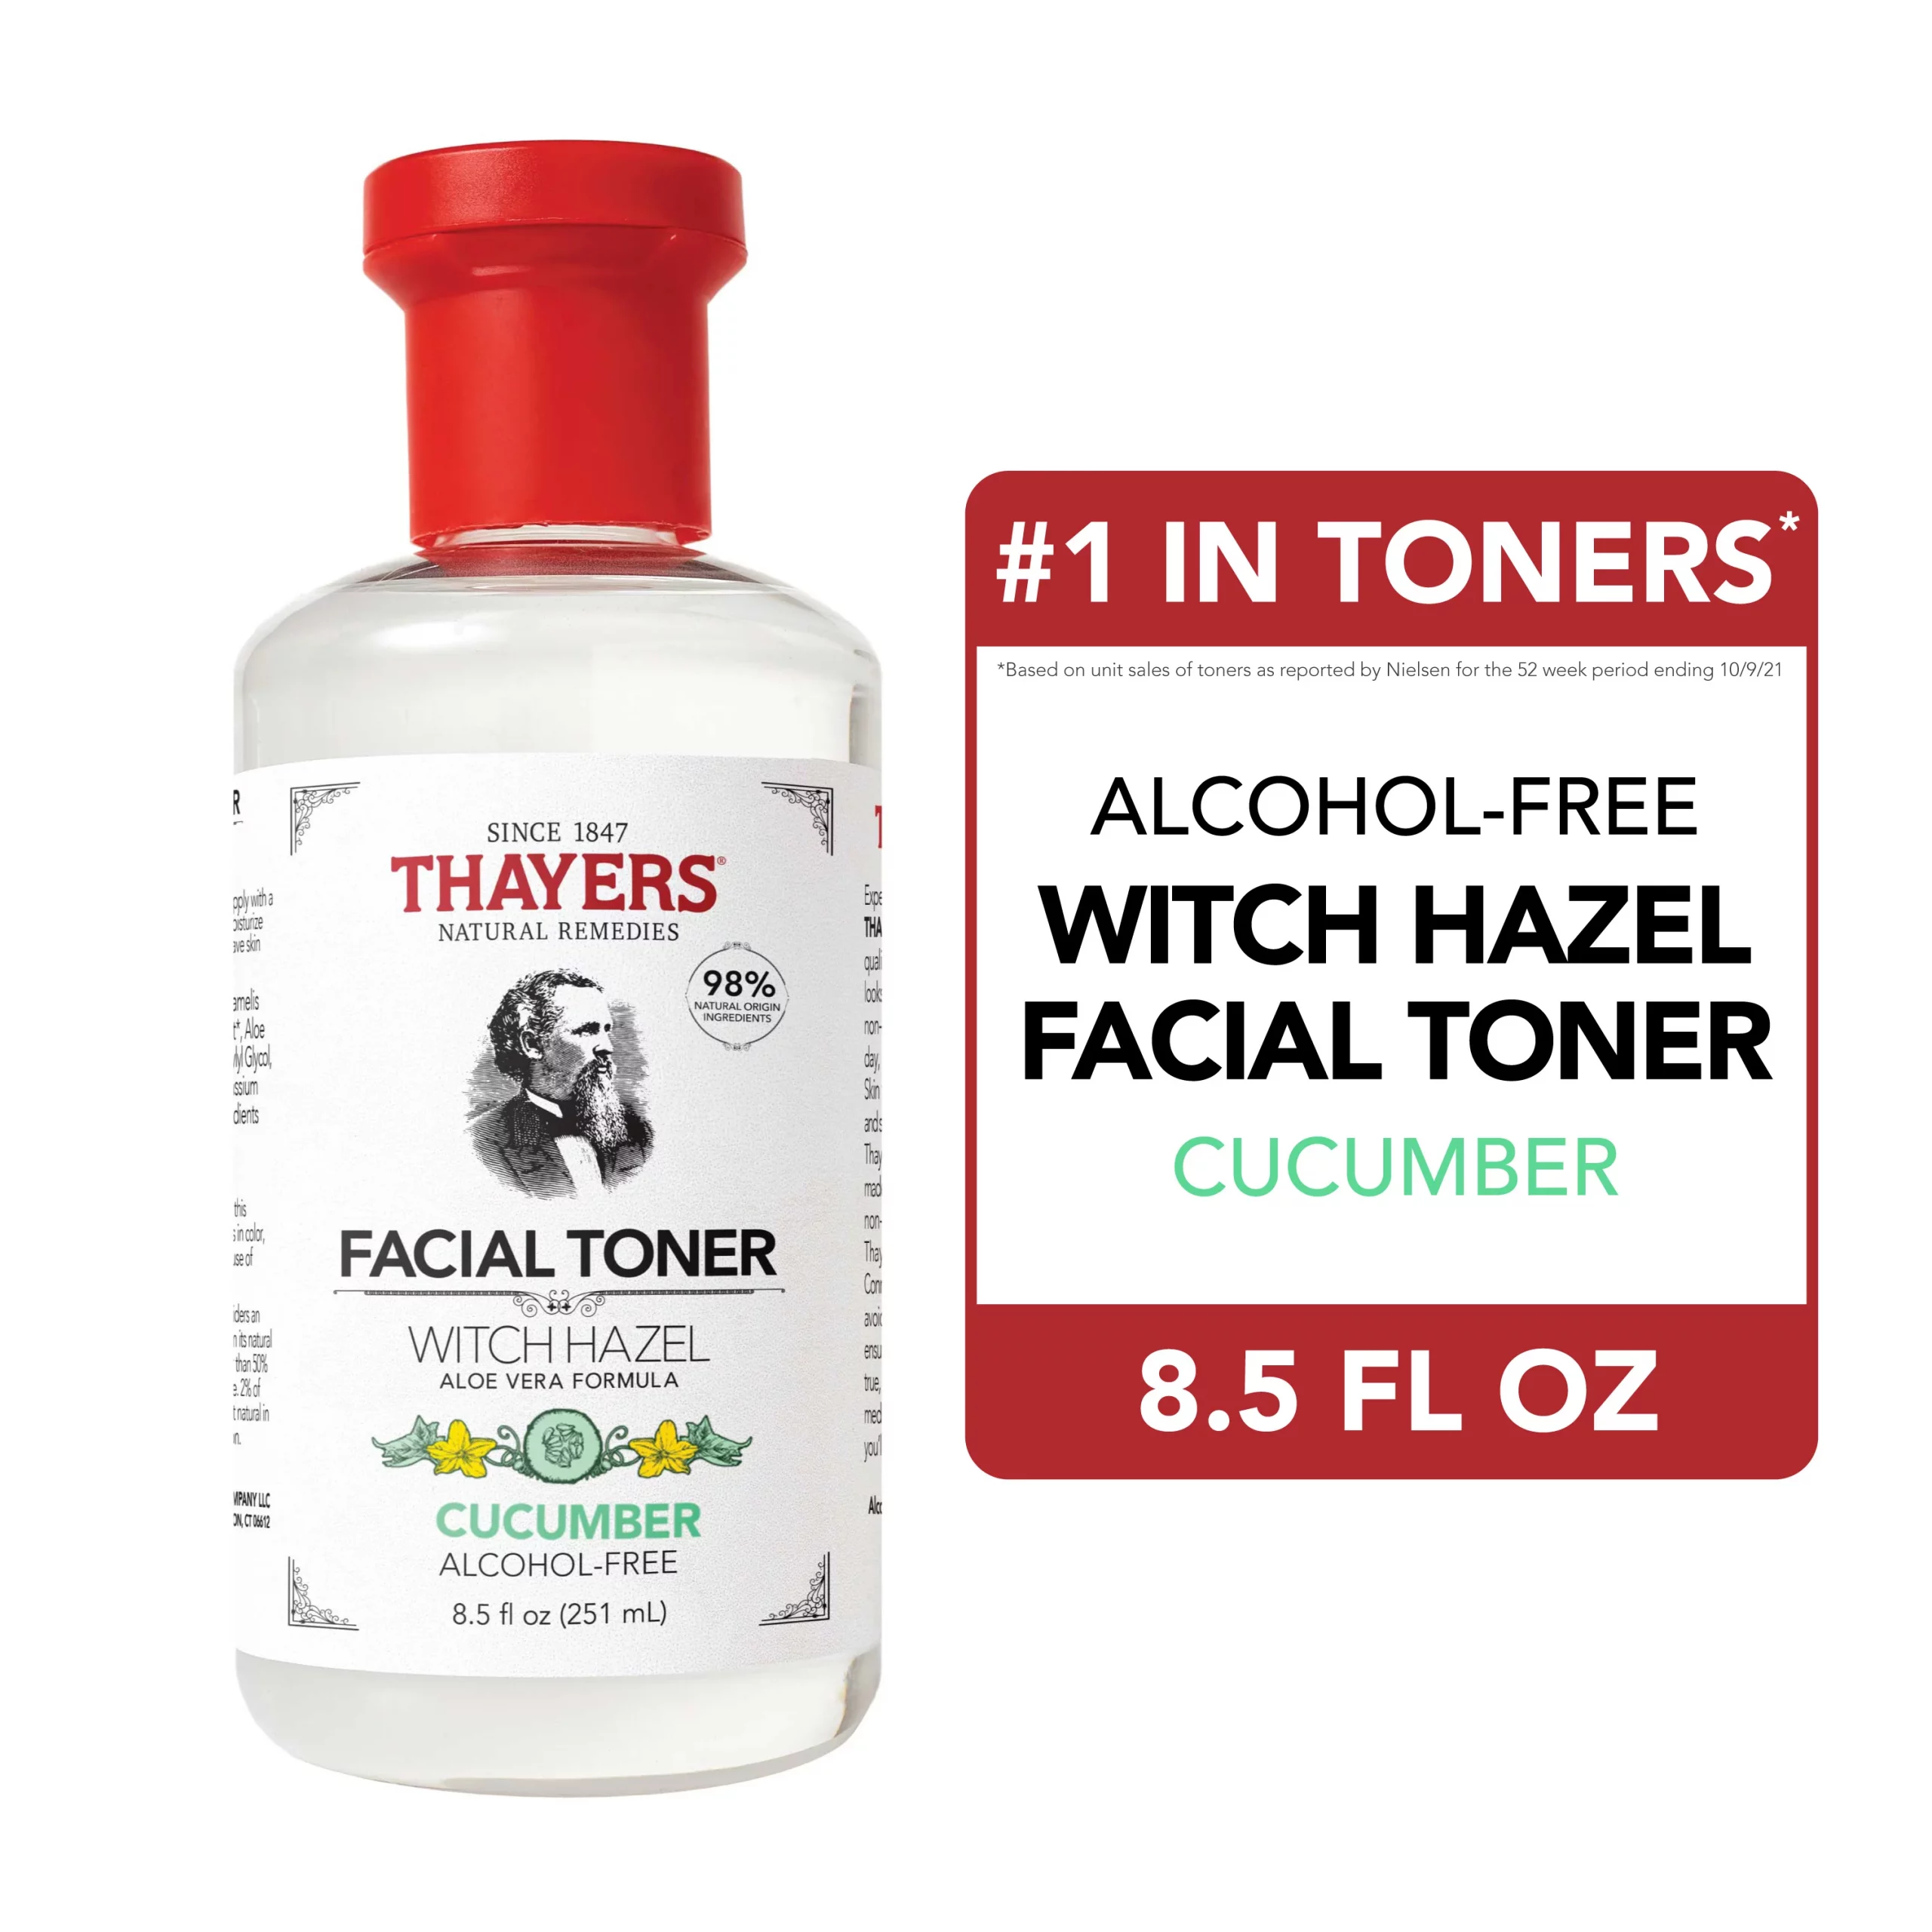 SAVE $2.00 on ANY ONE (1) Thayers Facial Toner